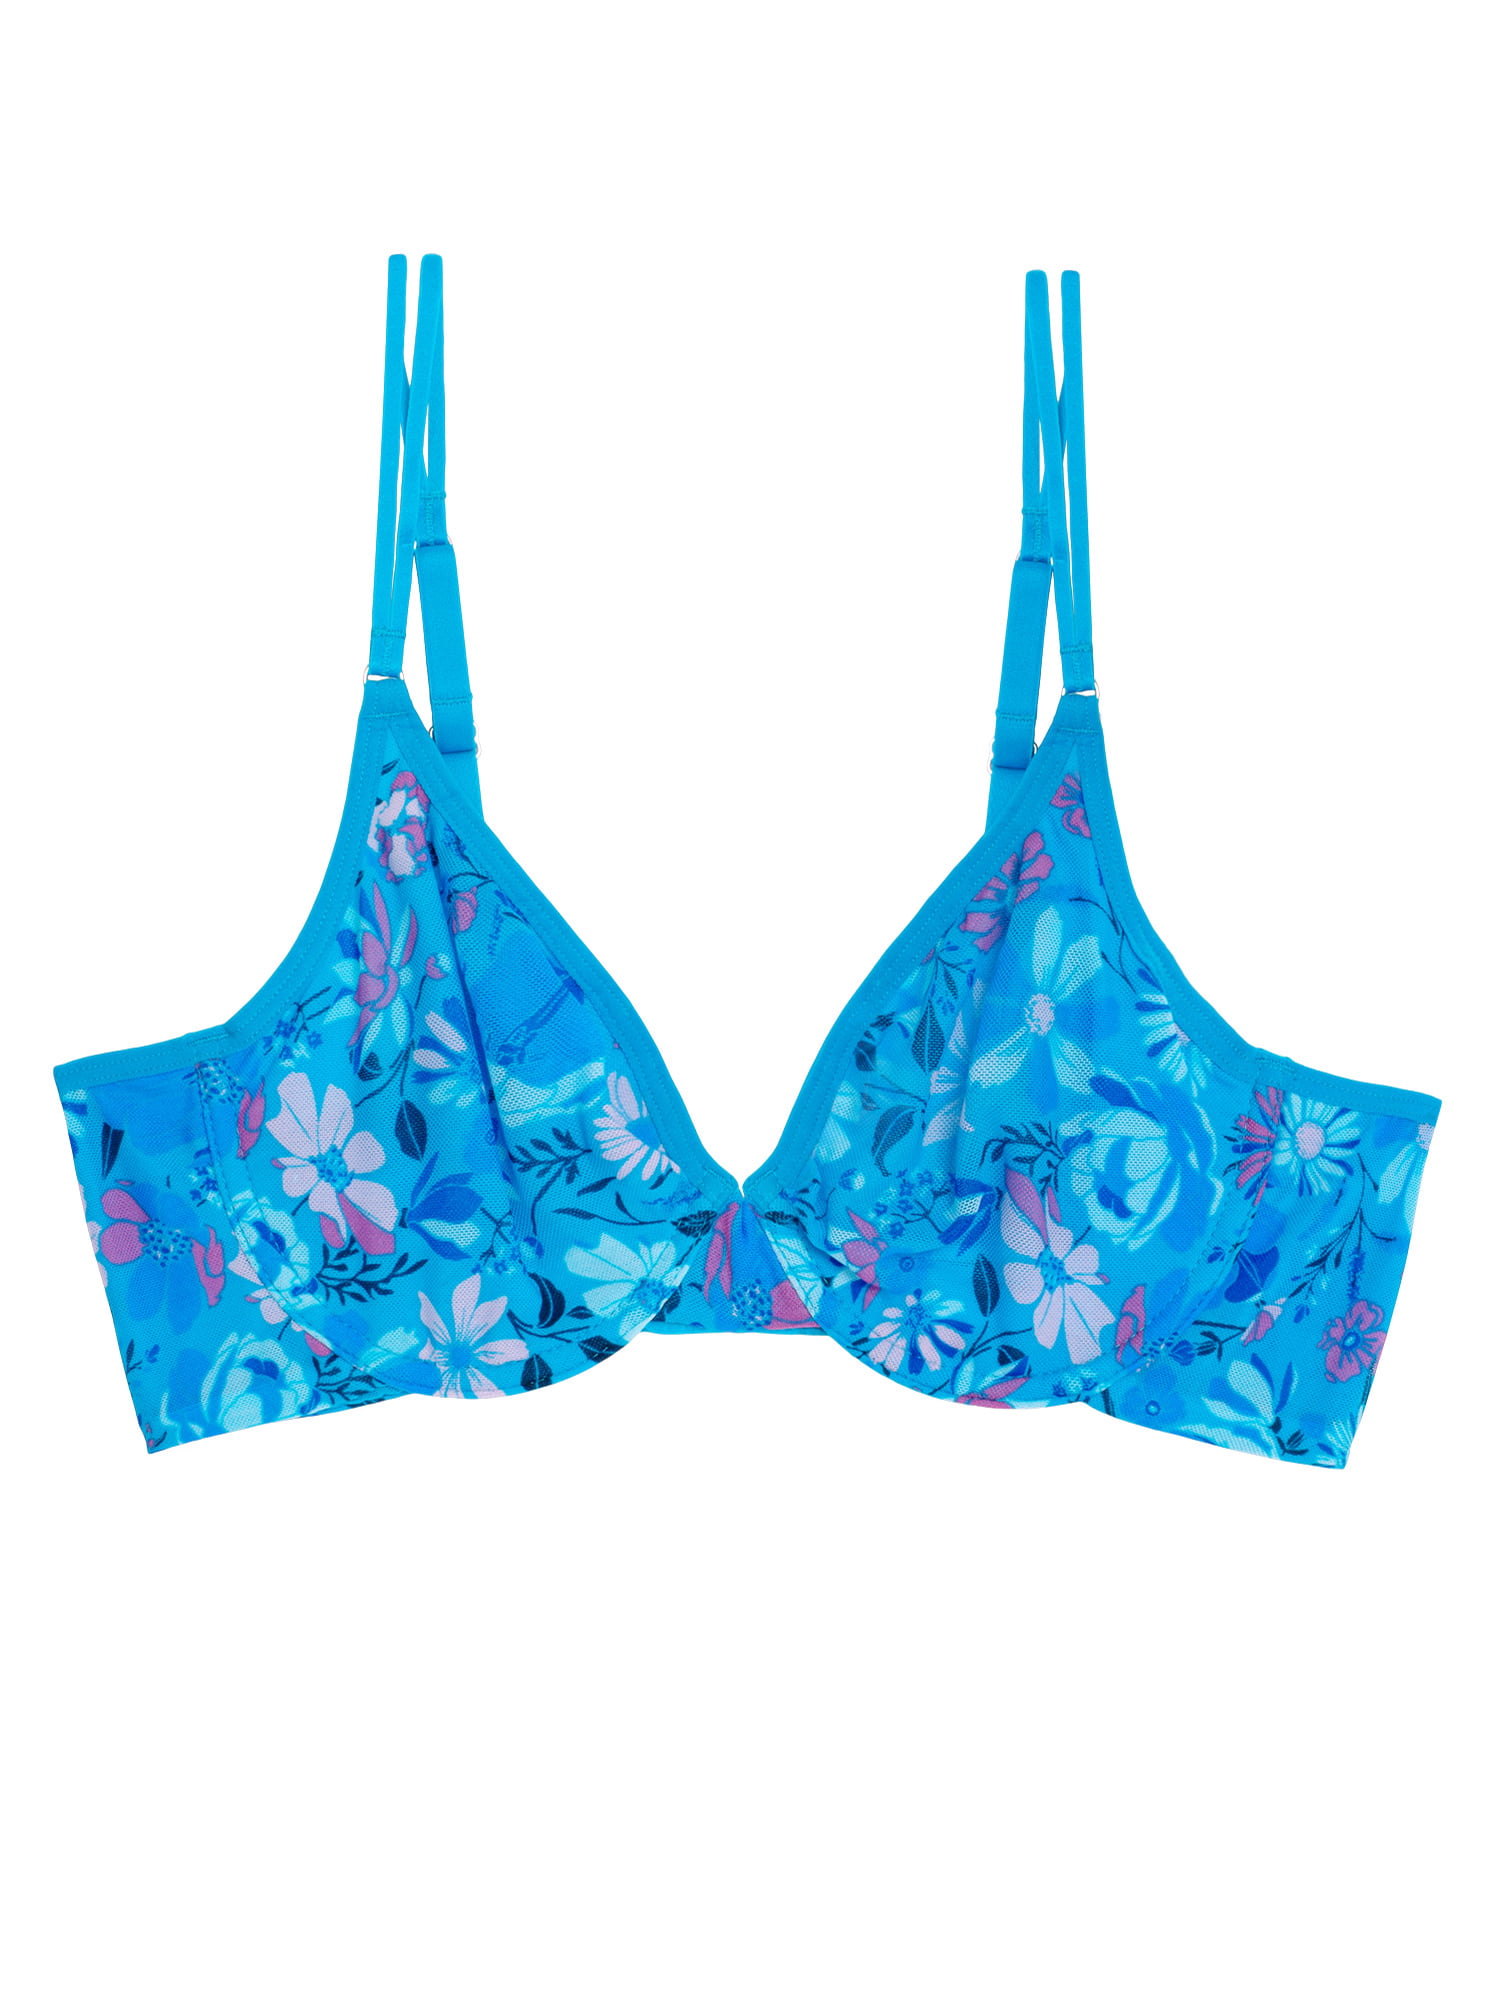 Brief Essentials - Something Blue & Sheer. 😗 The marianne unlined bra set  is perfect for natural comfort and fit. #BETipsandFacts- An unlined bra  does not have any padding or foam lining